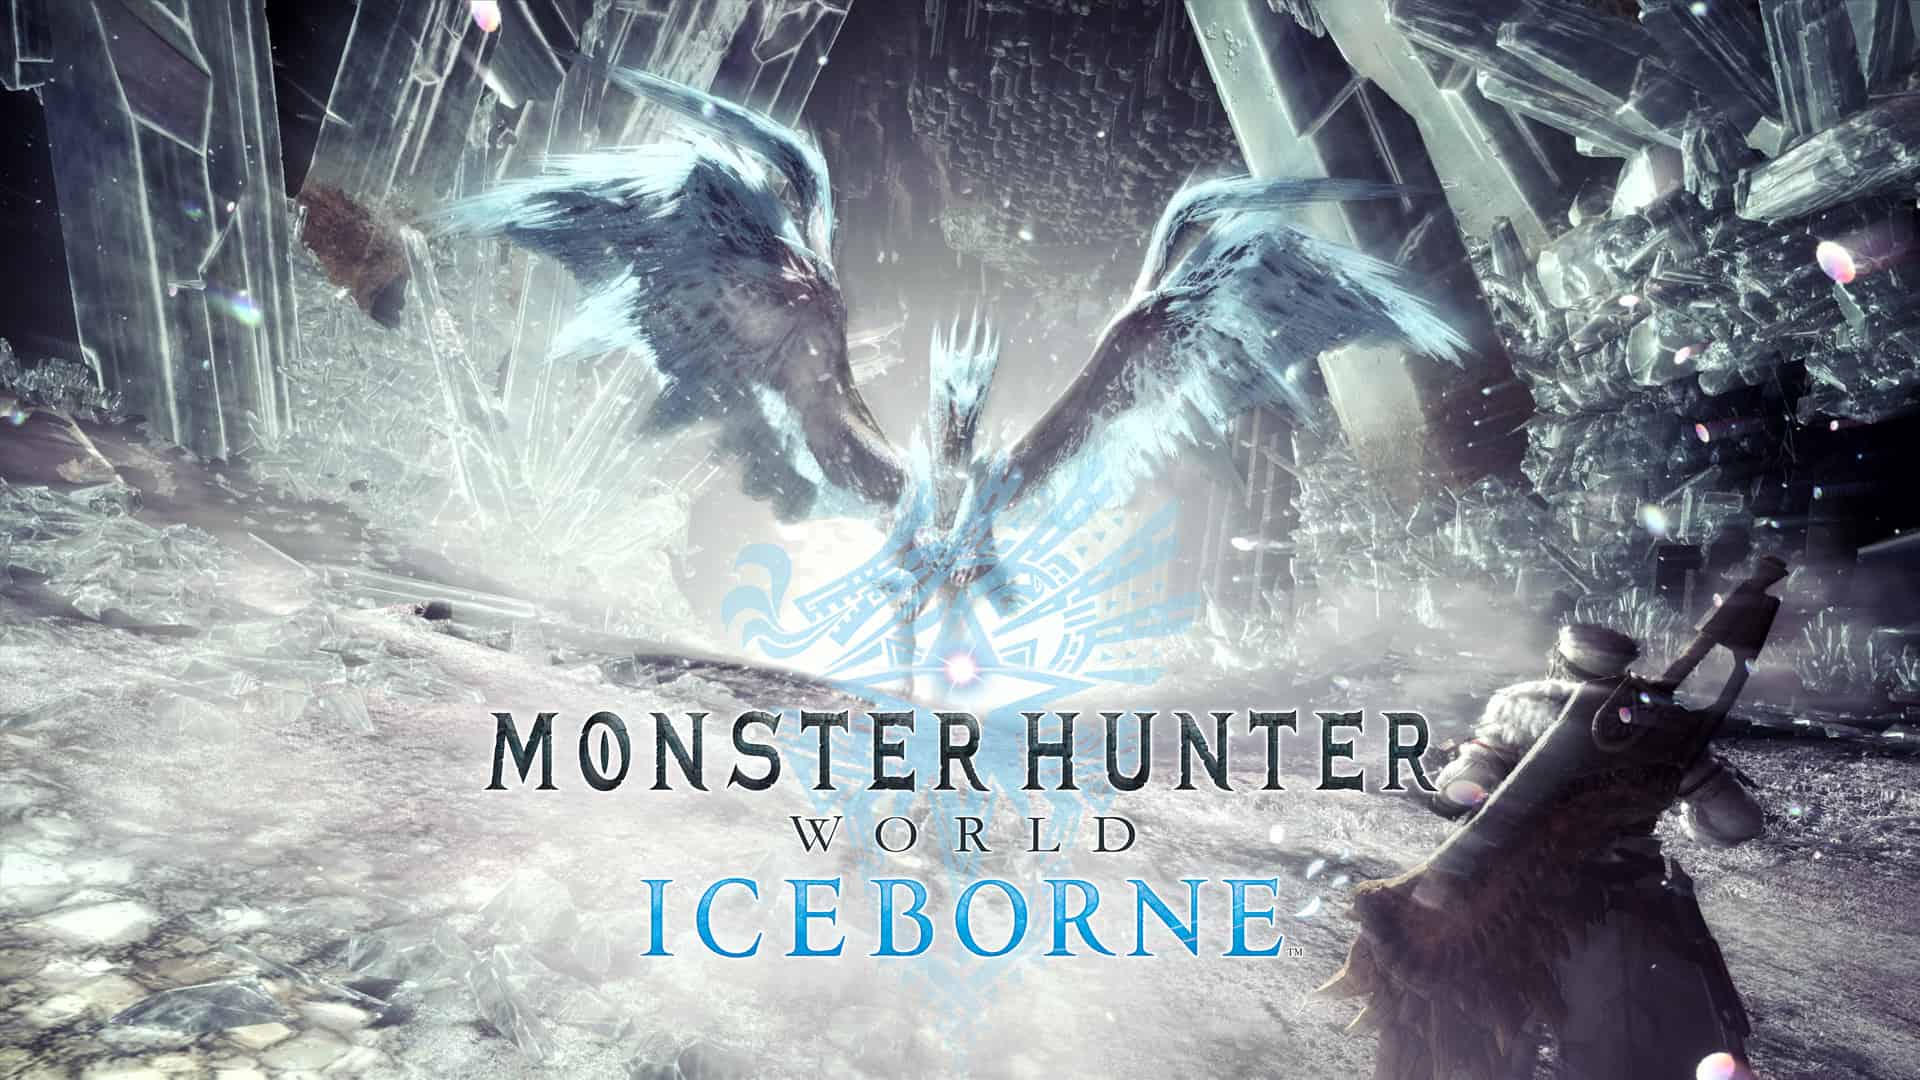 World: Of In Step PlayStation Hunter Monster The Gaming MKAU Into Iceborne 4 Frozen Lands | The Beta